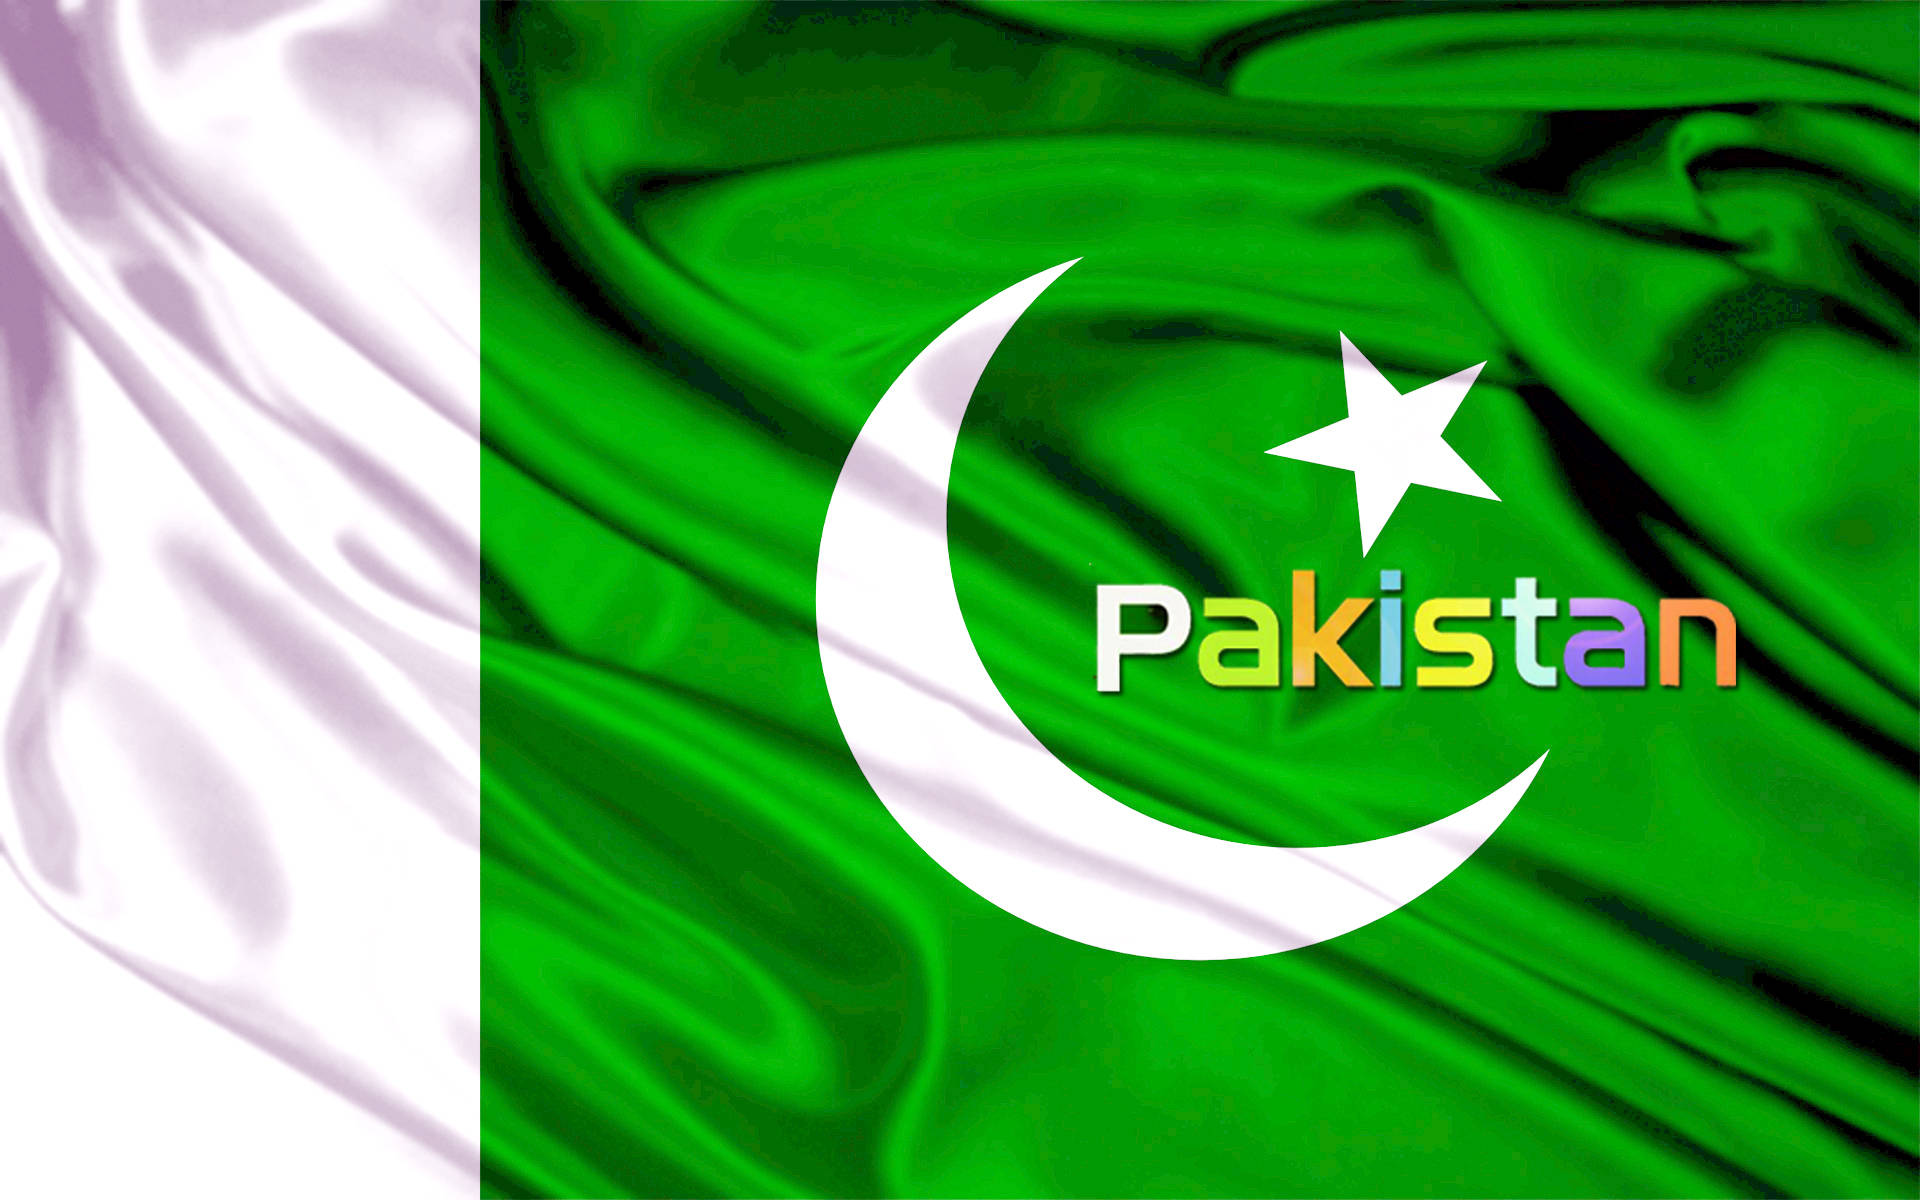 Pakistan Flag With Different Colored Letters Wallpaper